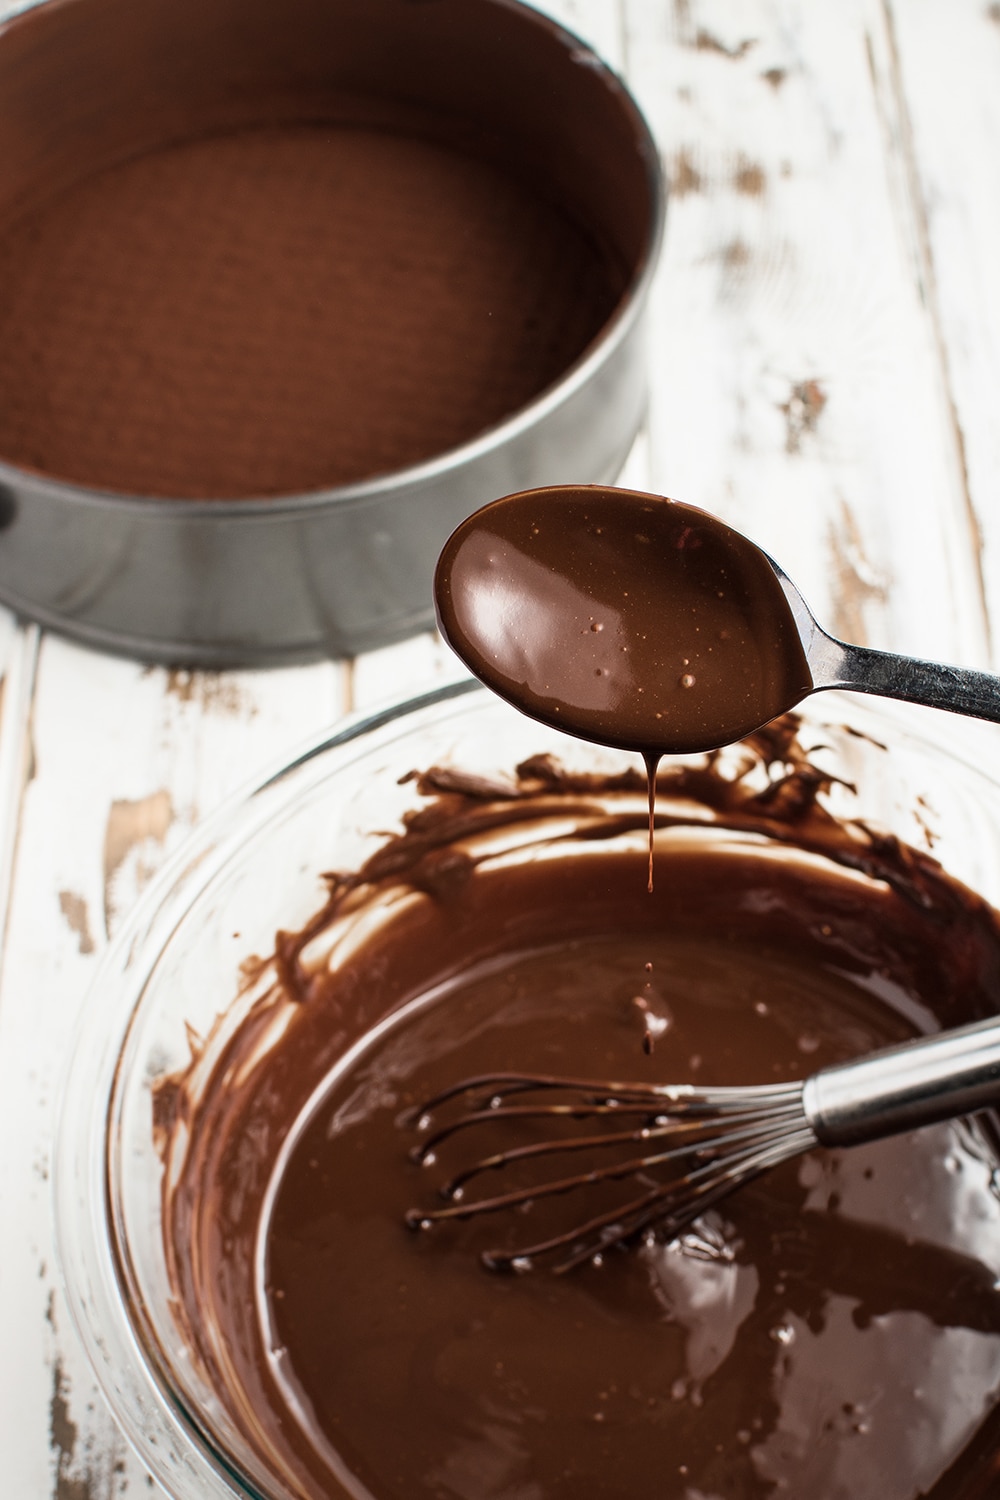 Bowl of melted chocolate with a dripping covered chocolate spoon on a rustic white wooden background 